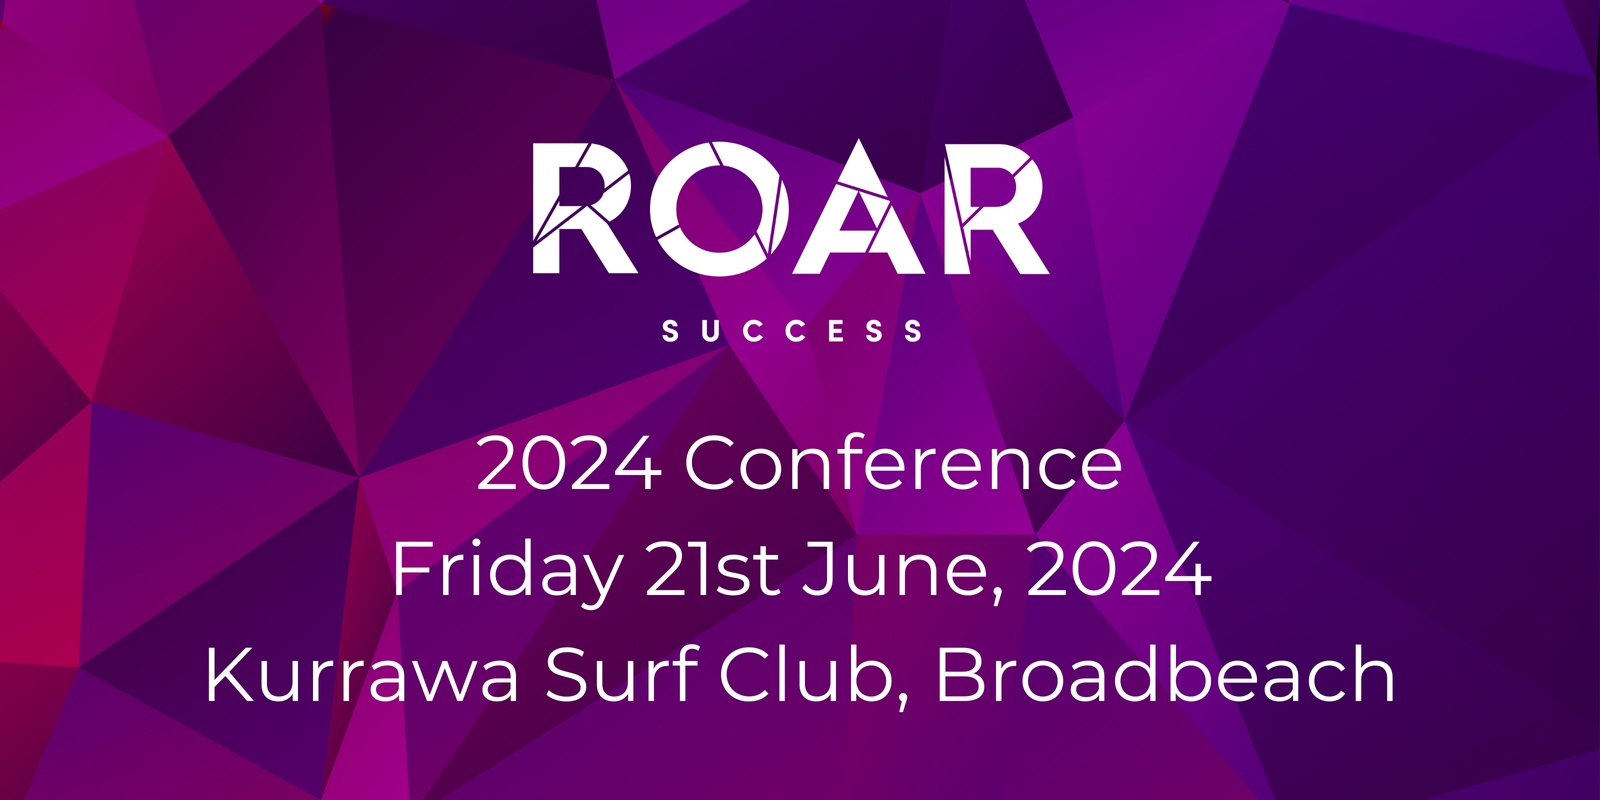 Banner image for 2024 Roar Success Conference